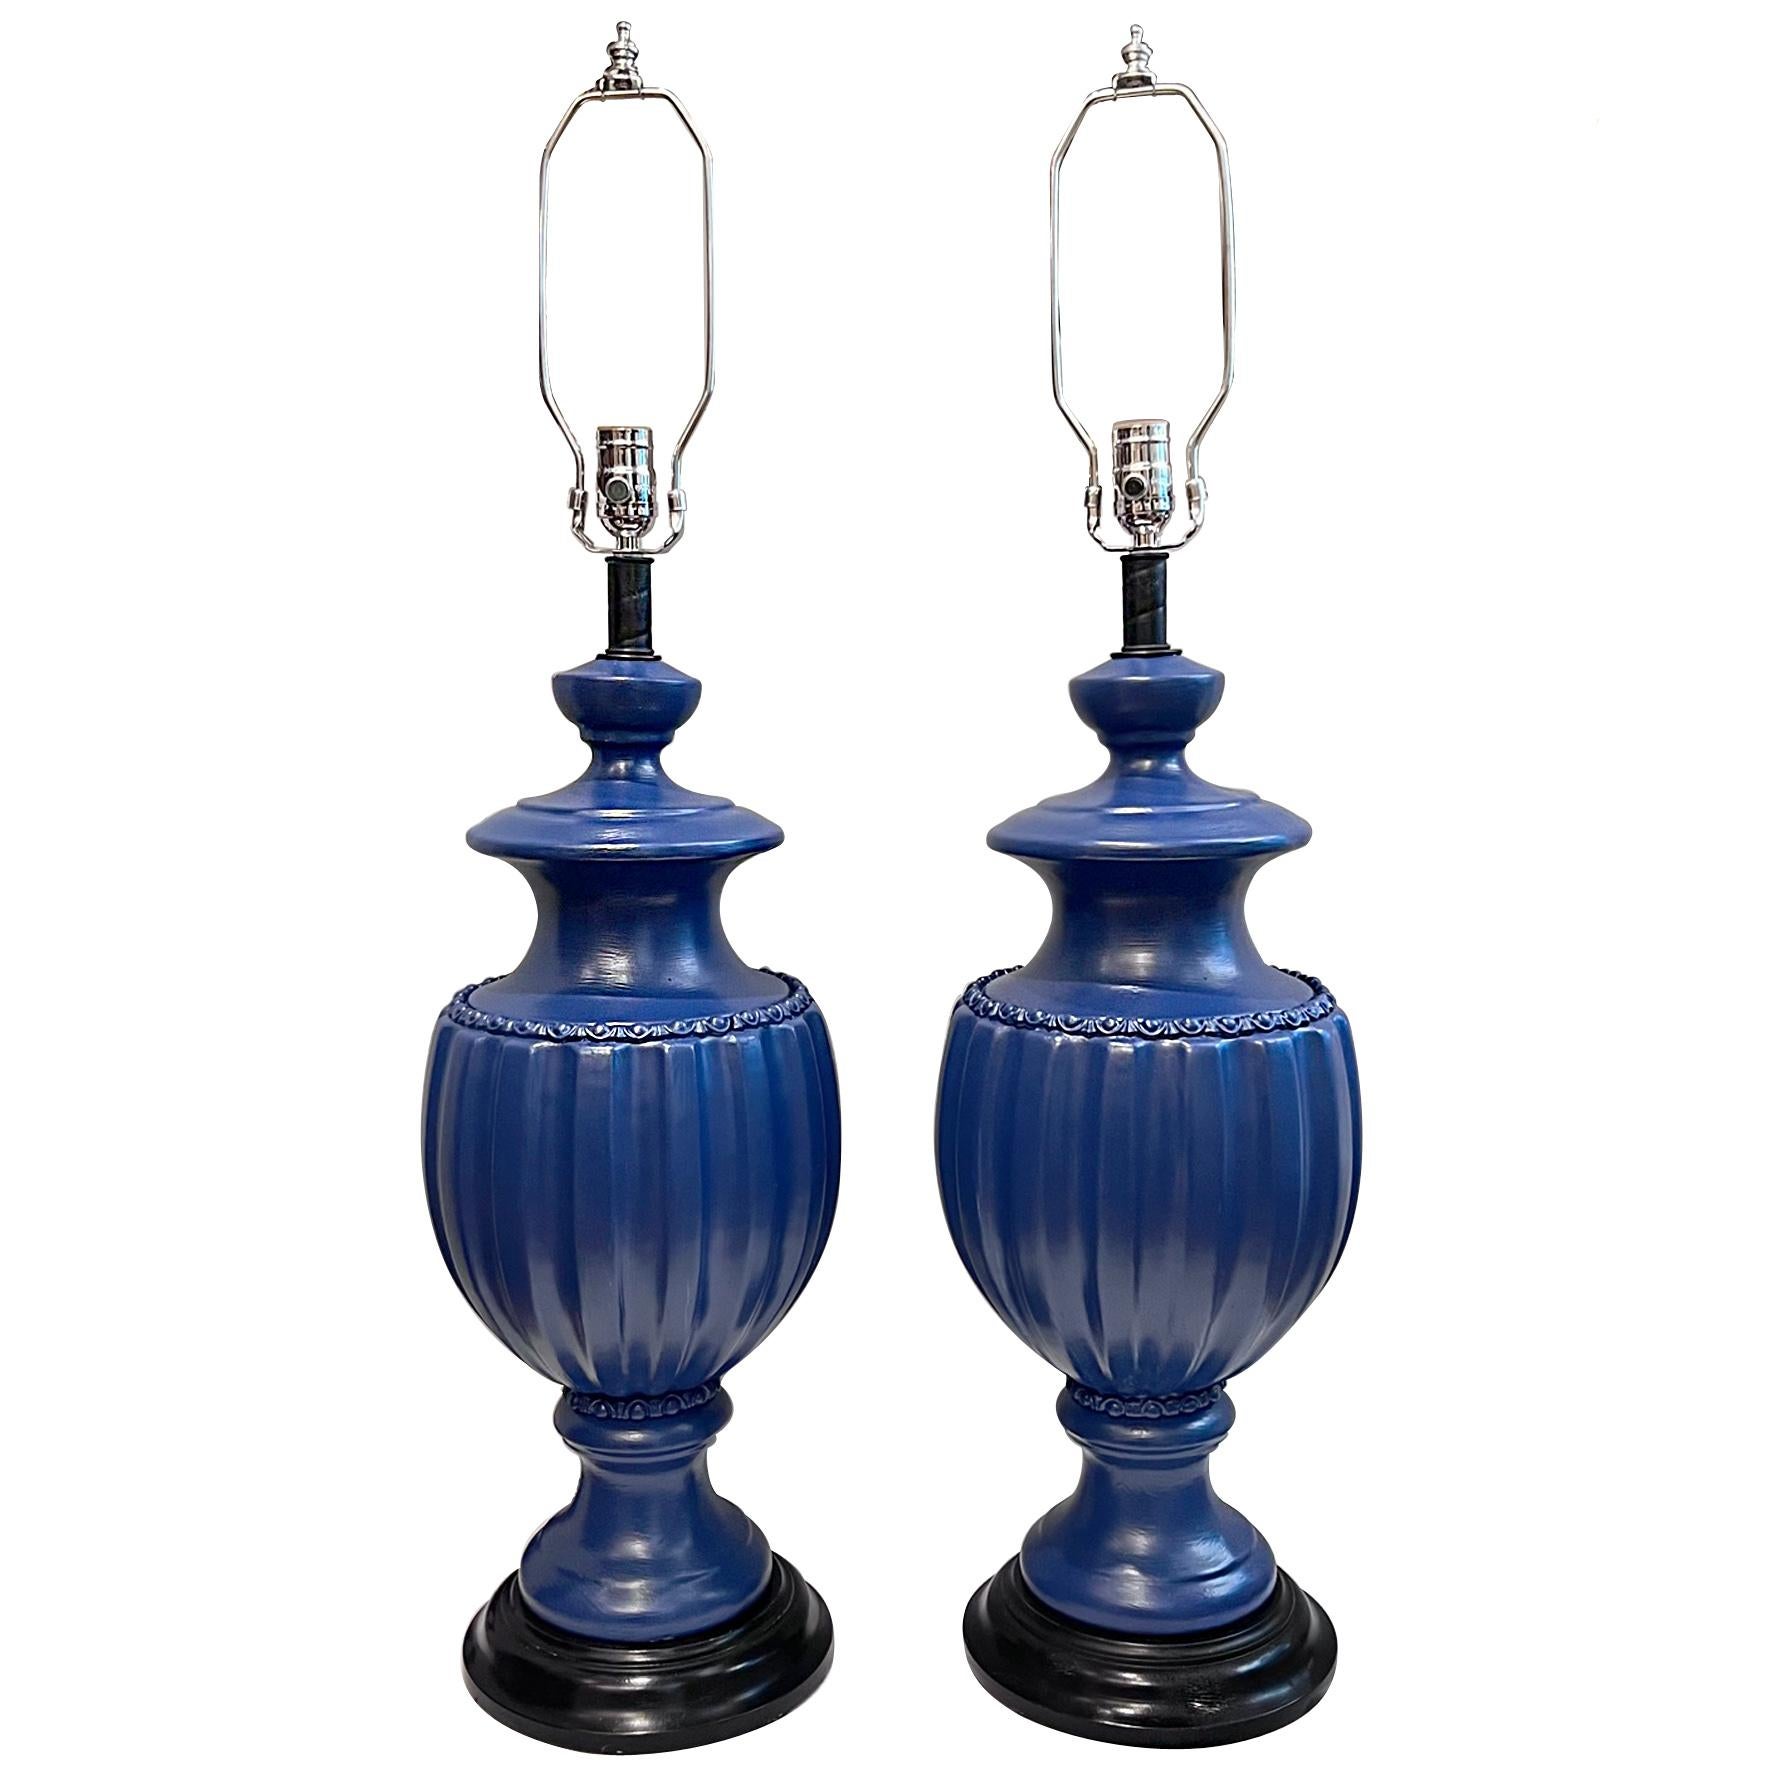 Pair of French circa 1960's blue lamps.

Measurements:
Height of body: 26.5